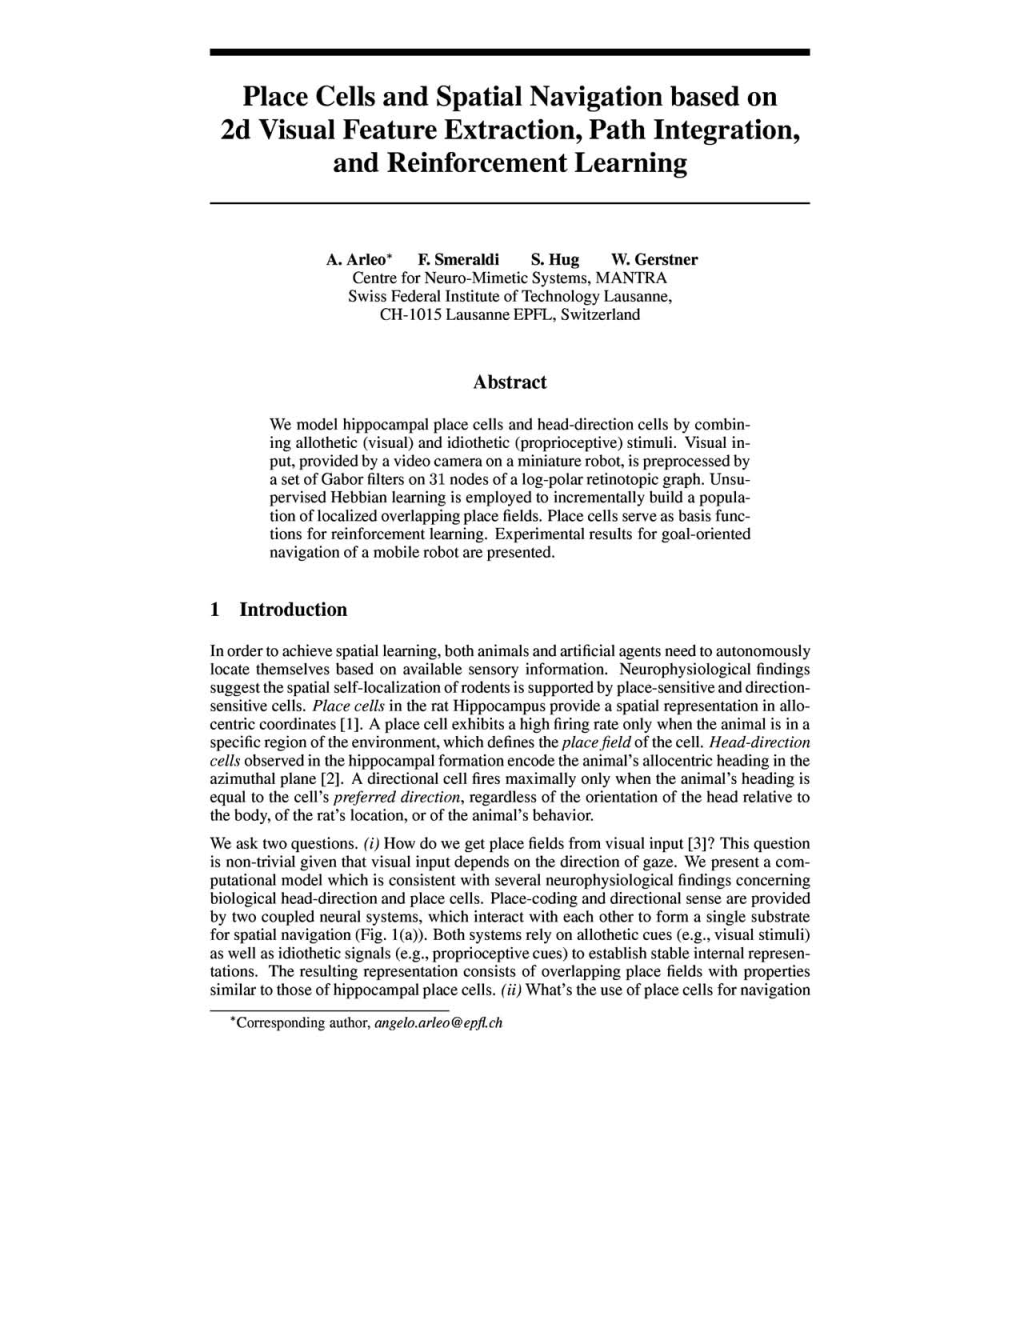 Place Cells and Spatial Navigation Based on 2D Visual Feature Extraction, Path Integration, and Reinforcement Learning